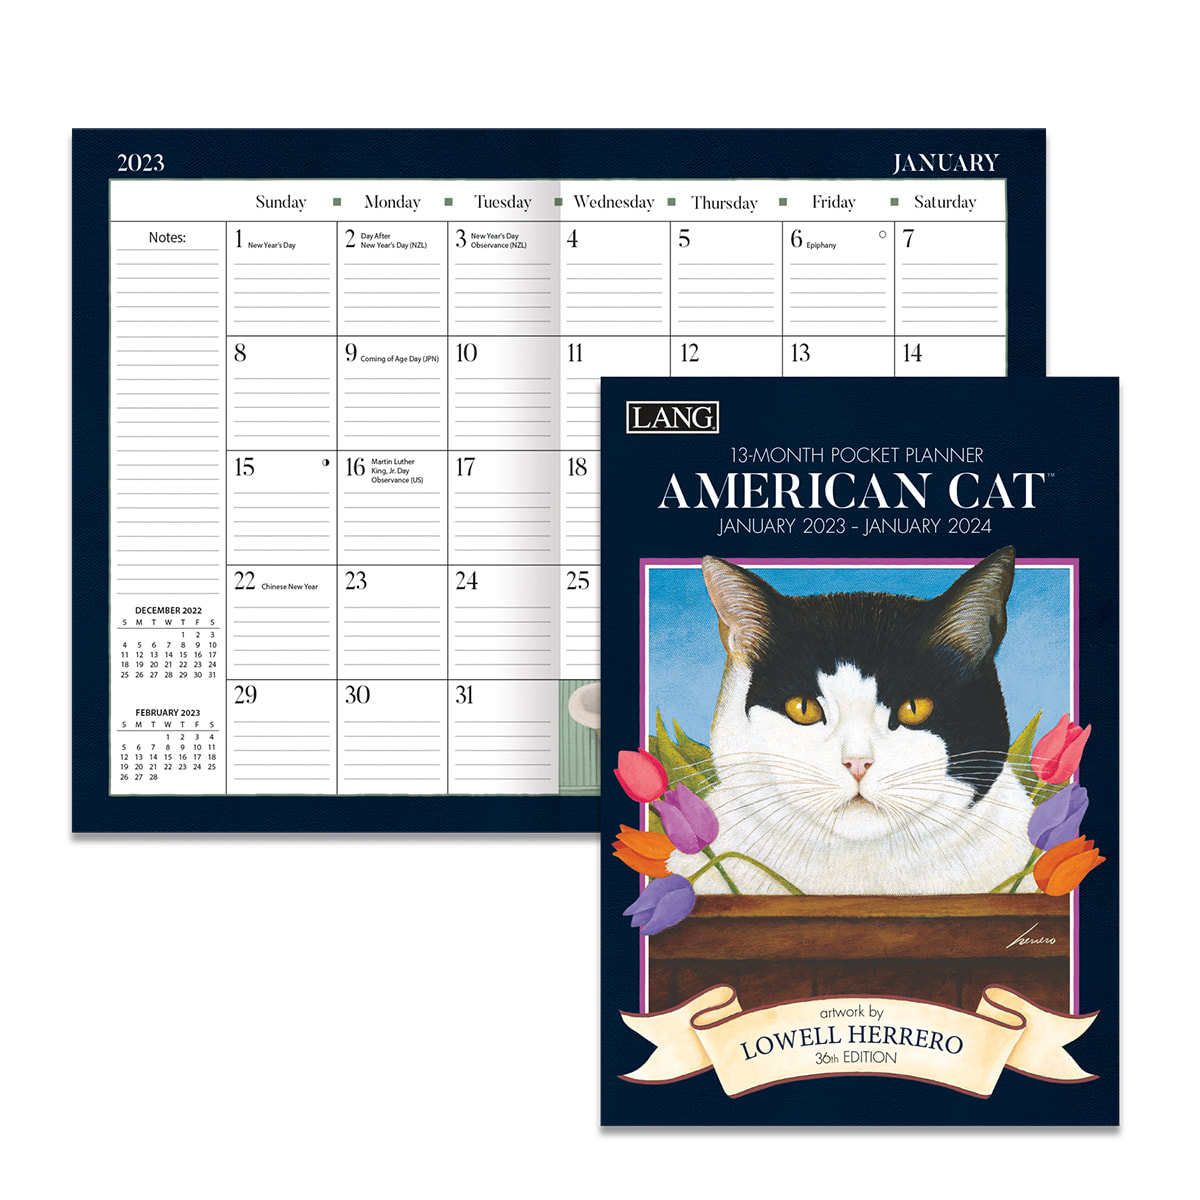 17991003156 Lang 2017 American Cat Monthly Pocket Planner 4.5 x 6.5 inches 